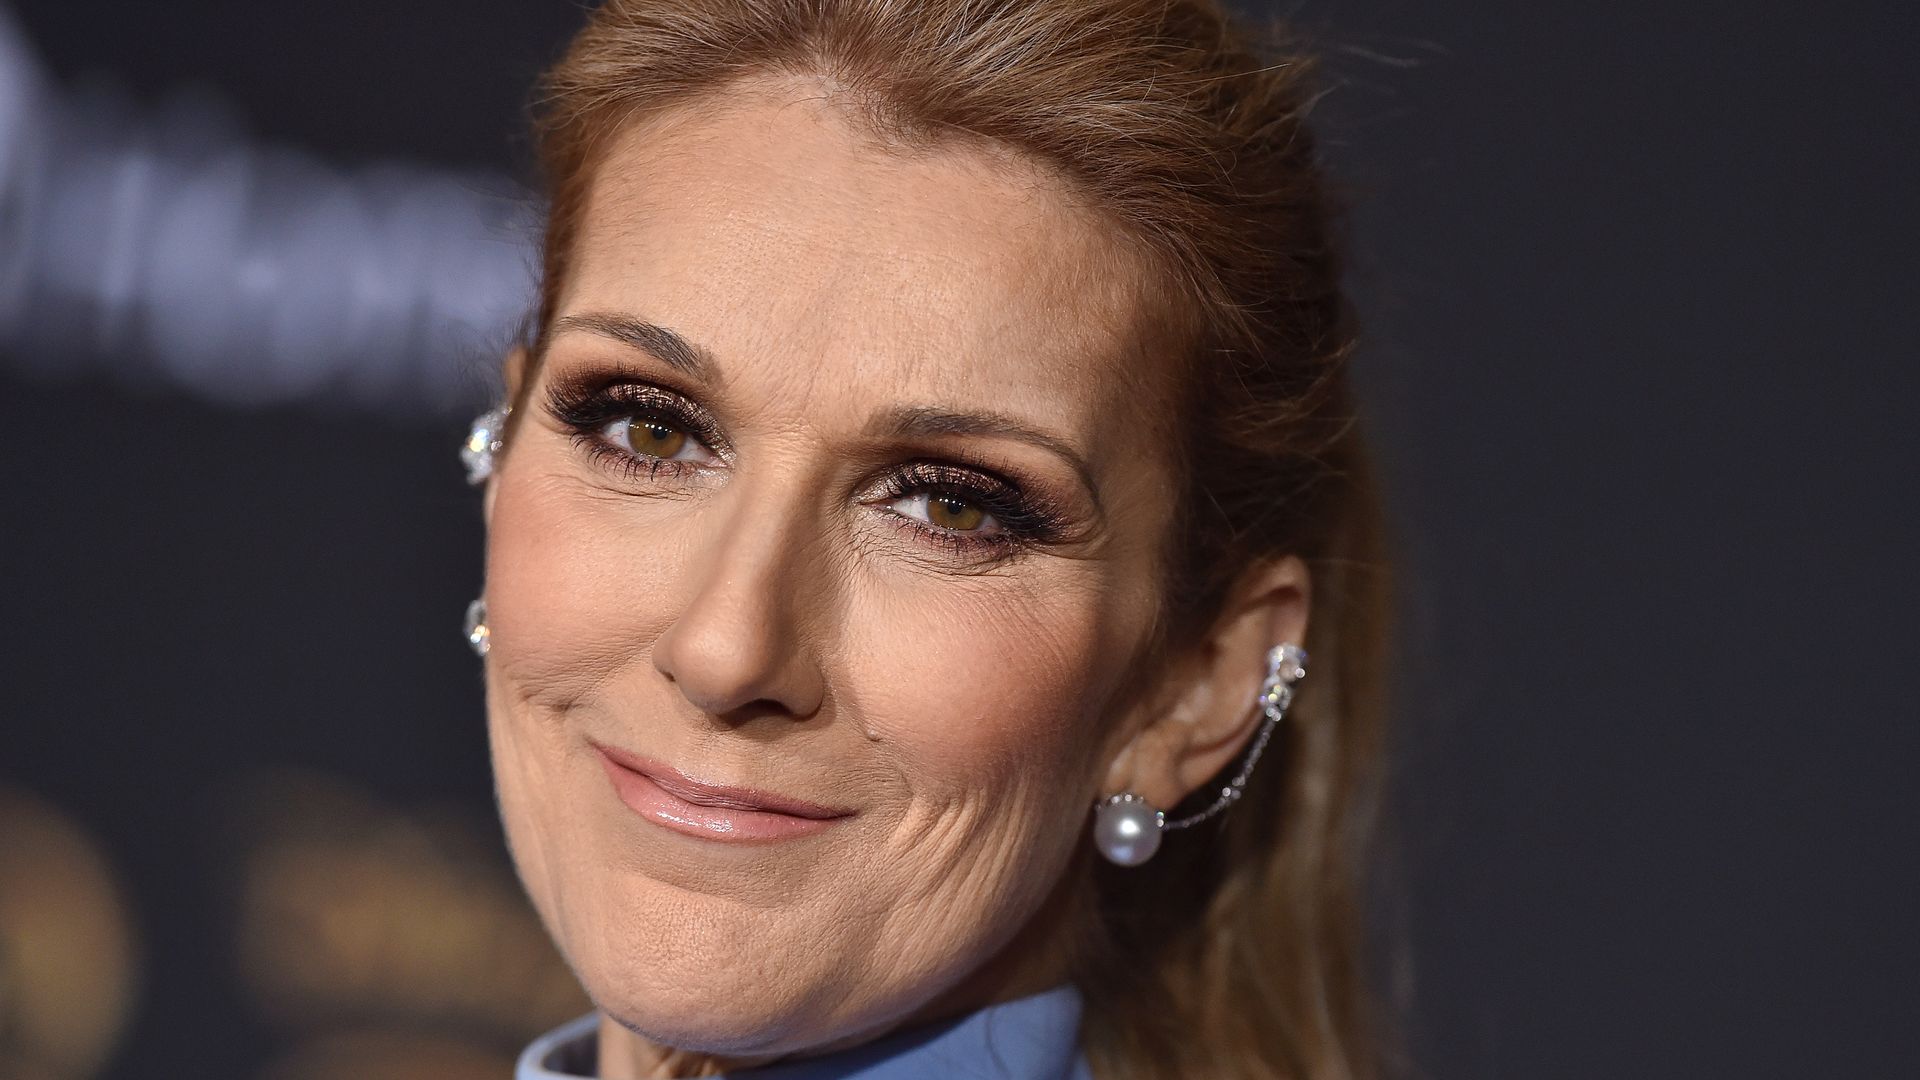 Celine Dion at the "Beauty and the Beast" premiere